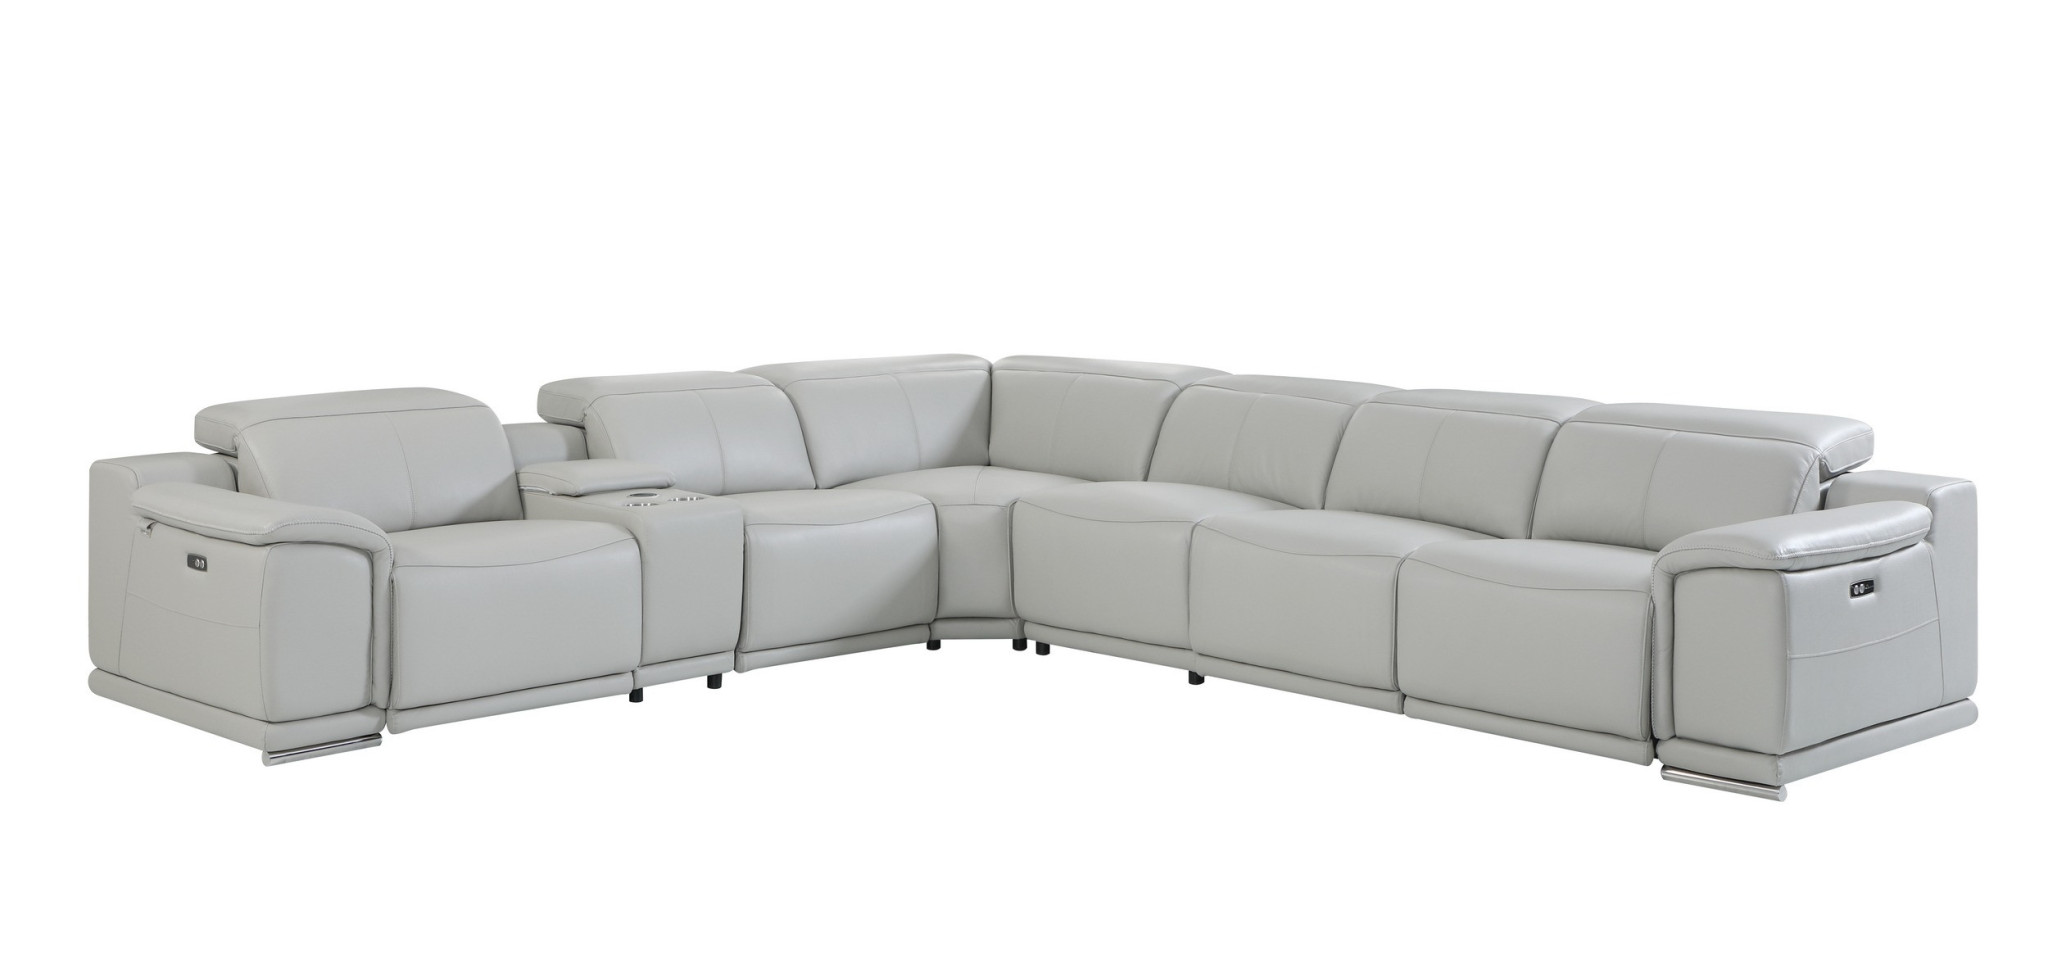 Light Gray Italian Leather Power Reclining U Shaped Seven Piece Corner Sectional With Console-476595-1